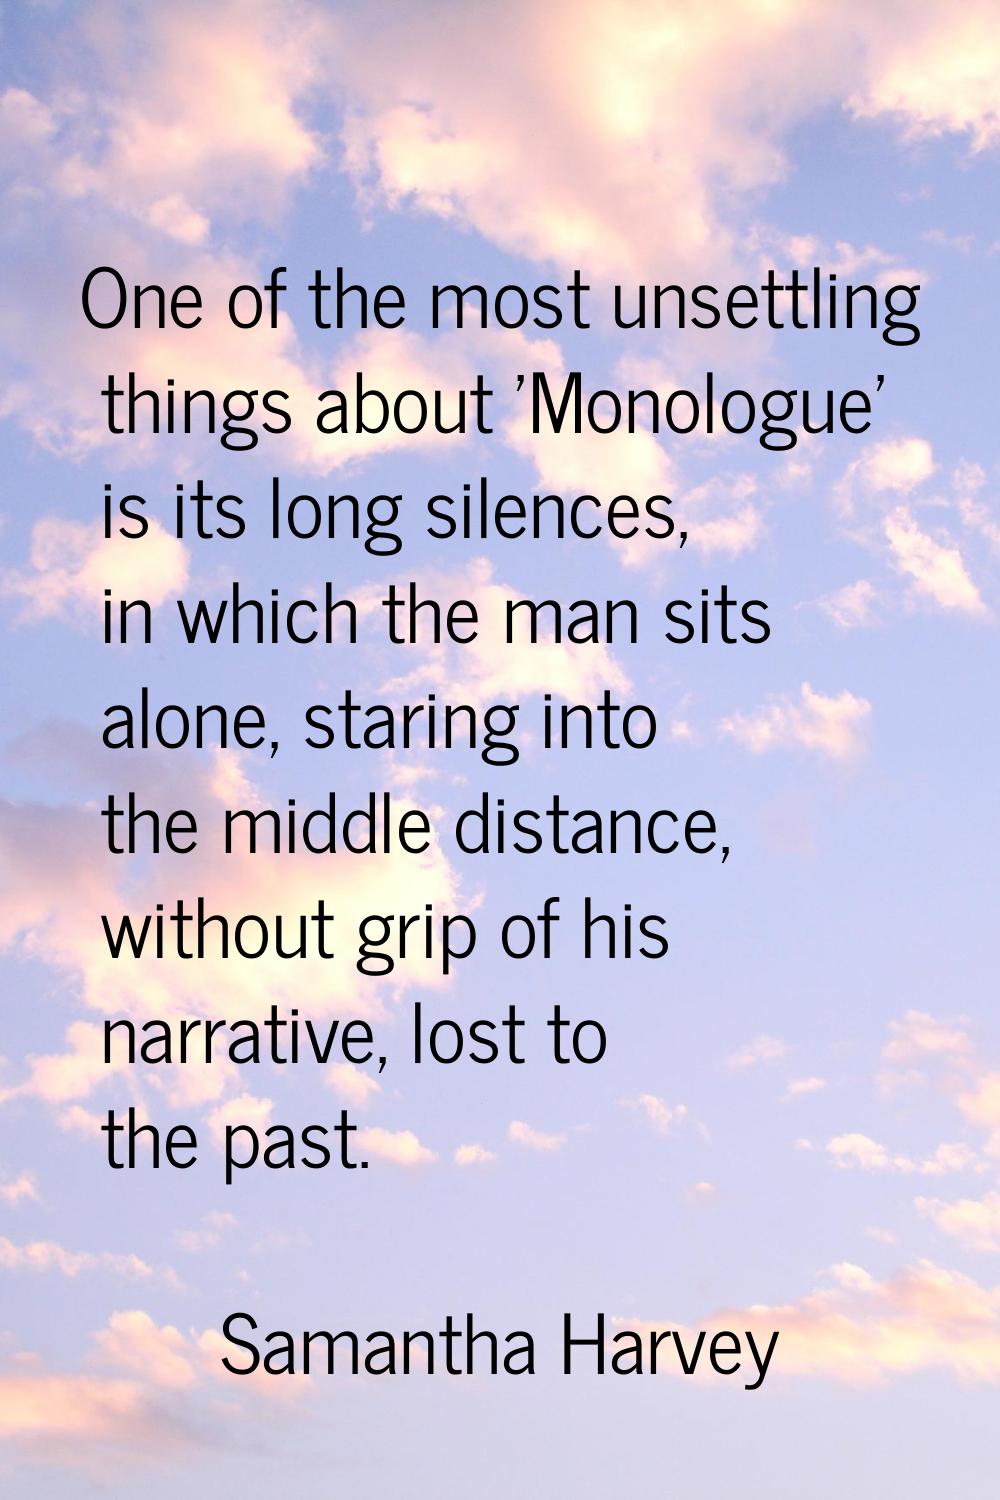 One of the most unsettling things about 'Monologue' is its long silences, in which the man sits alo